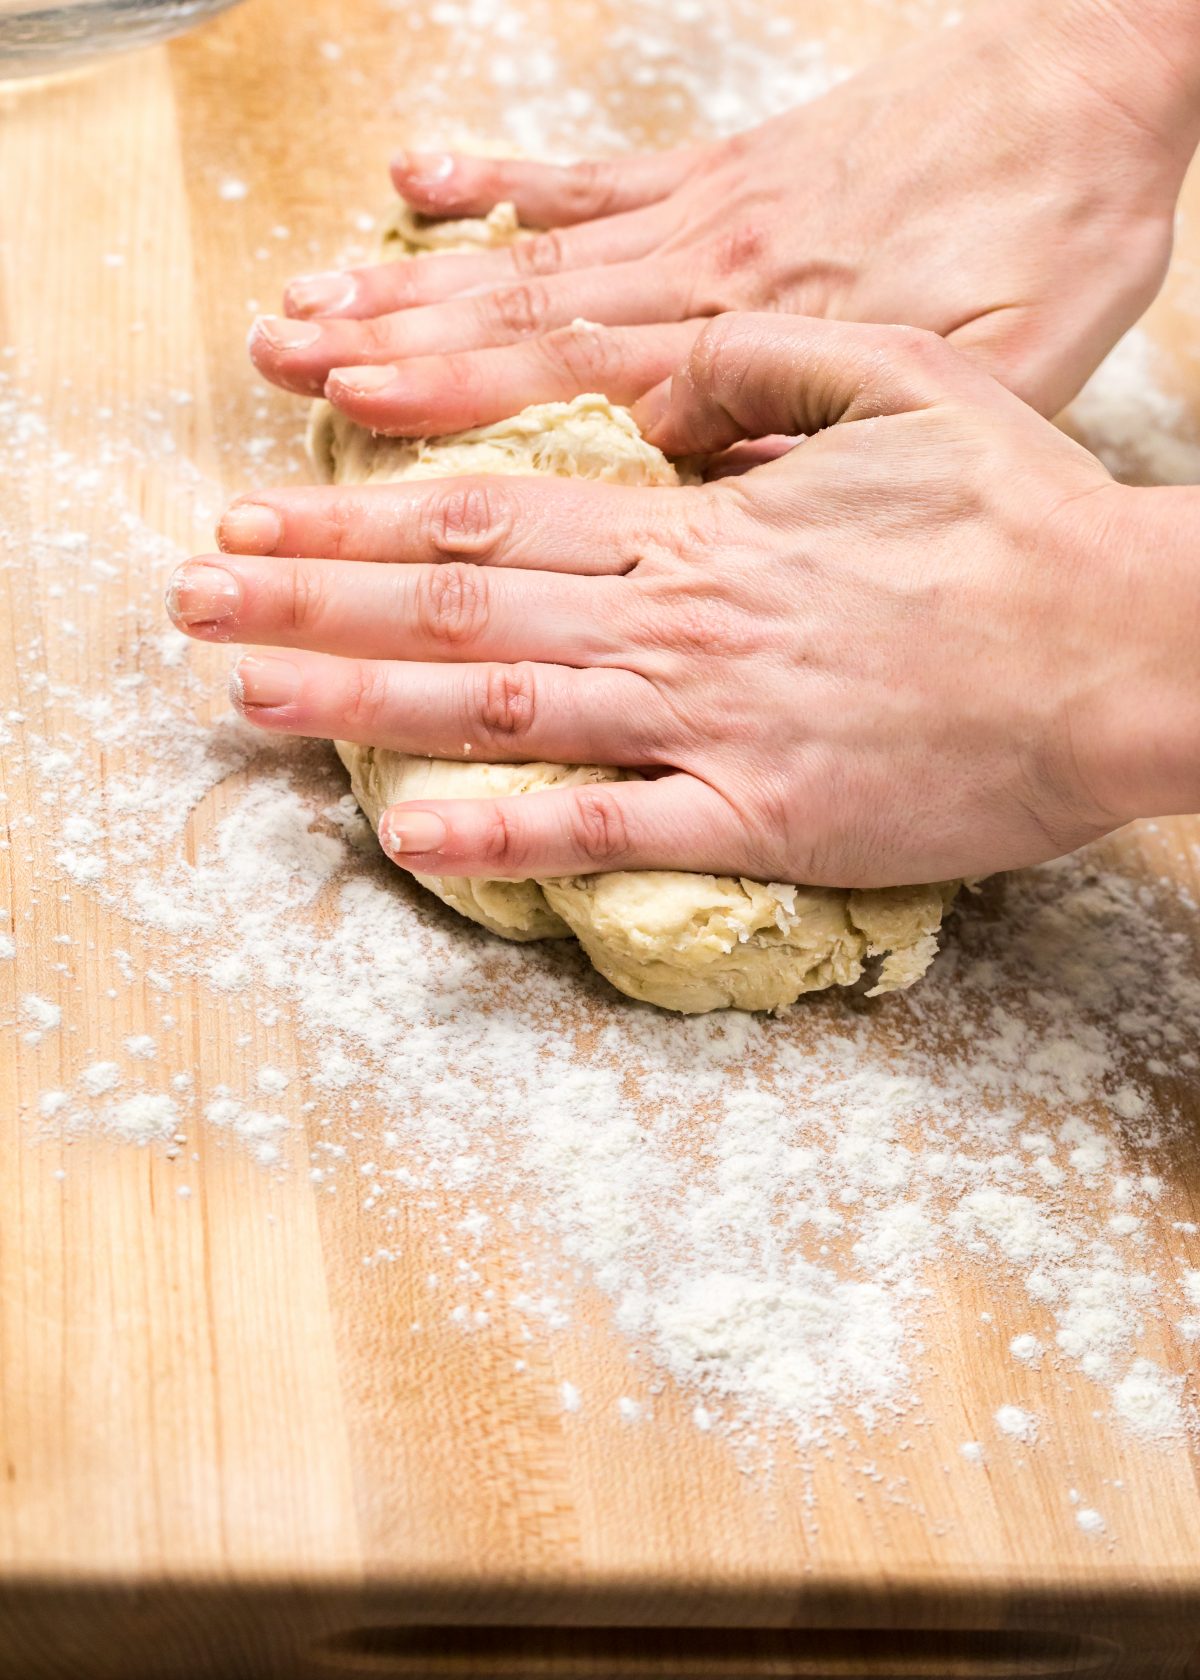 Once dough is a elastic consistency turn out onto a floured surface